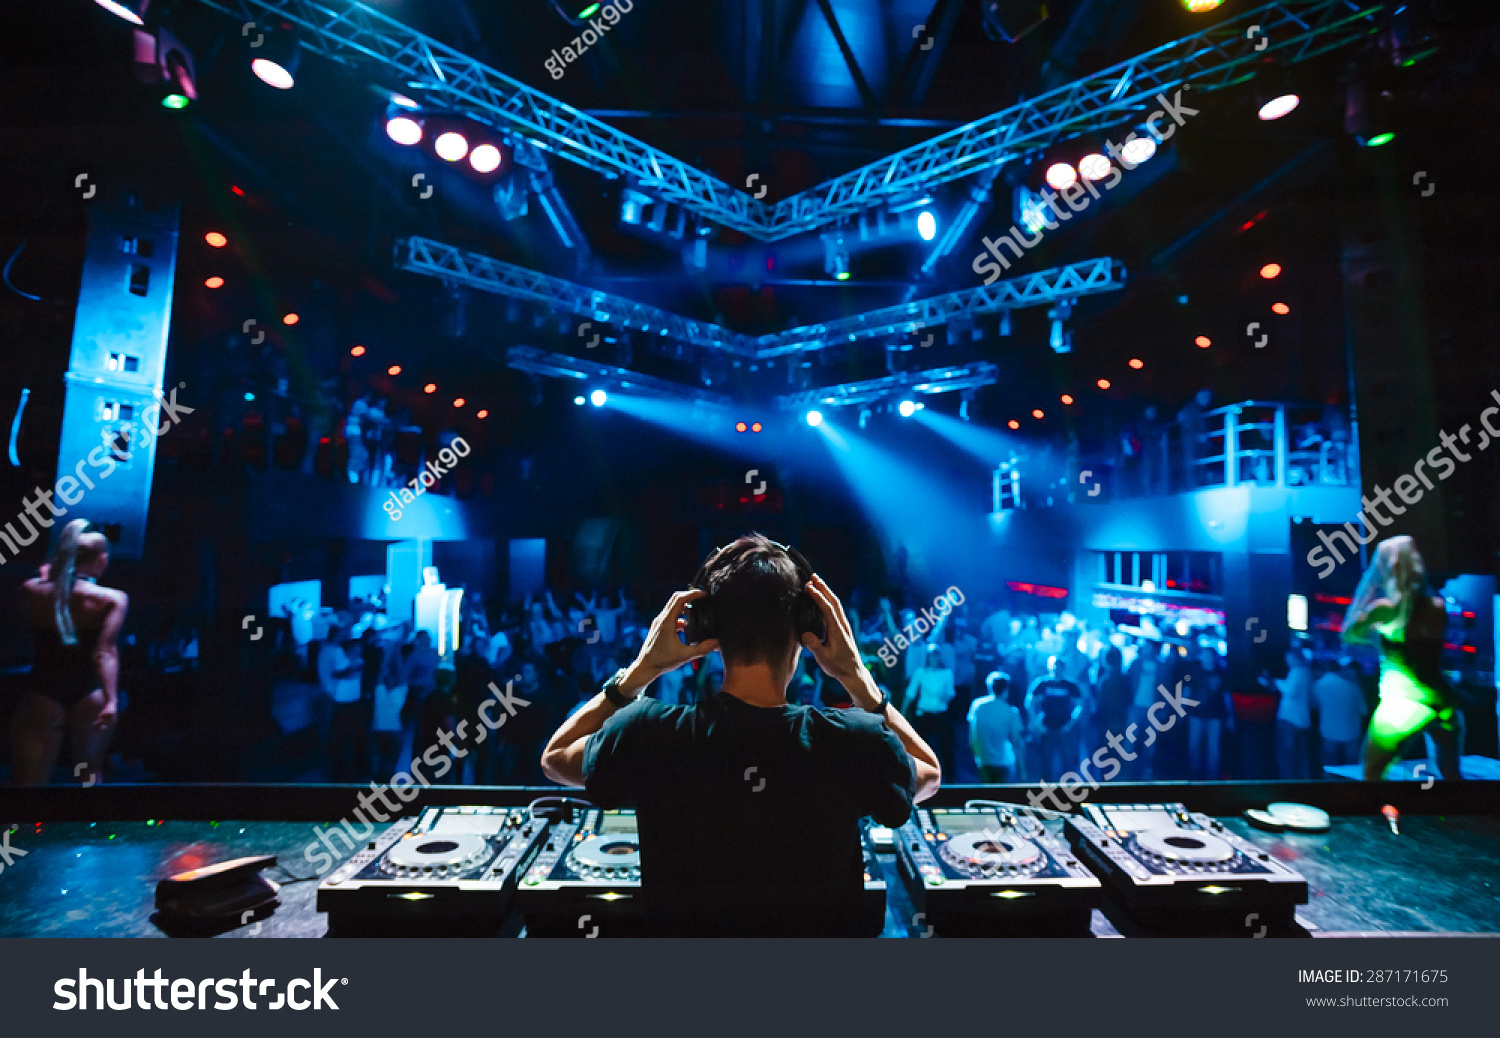 DJ with headphones at night club party under the blue light and people crowd in background #287171675